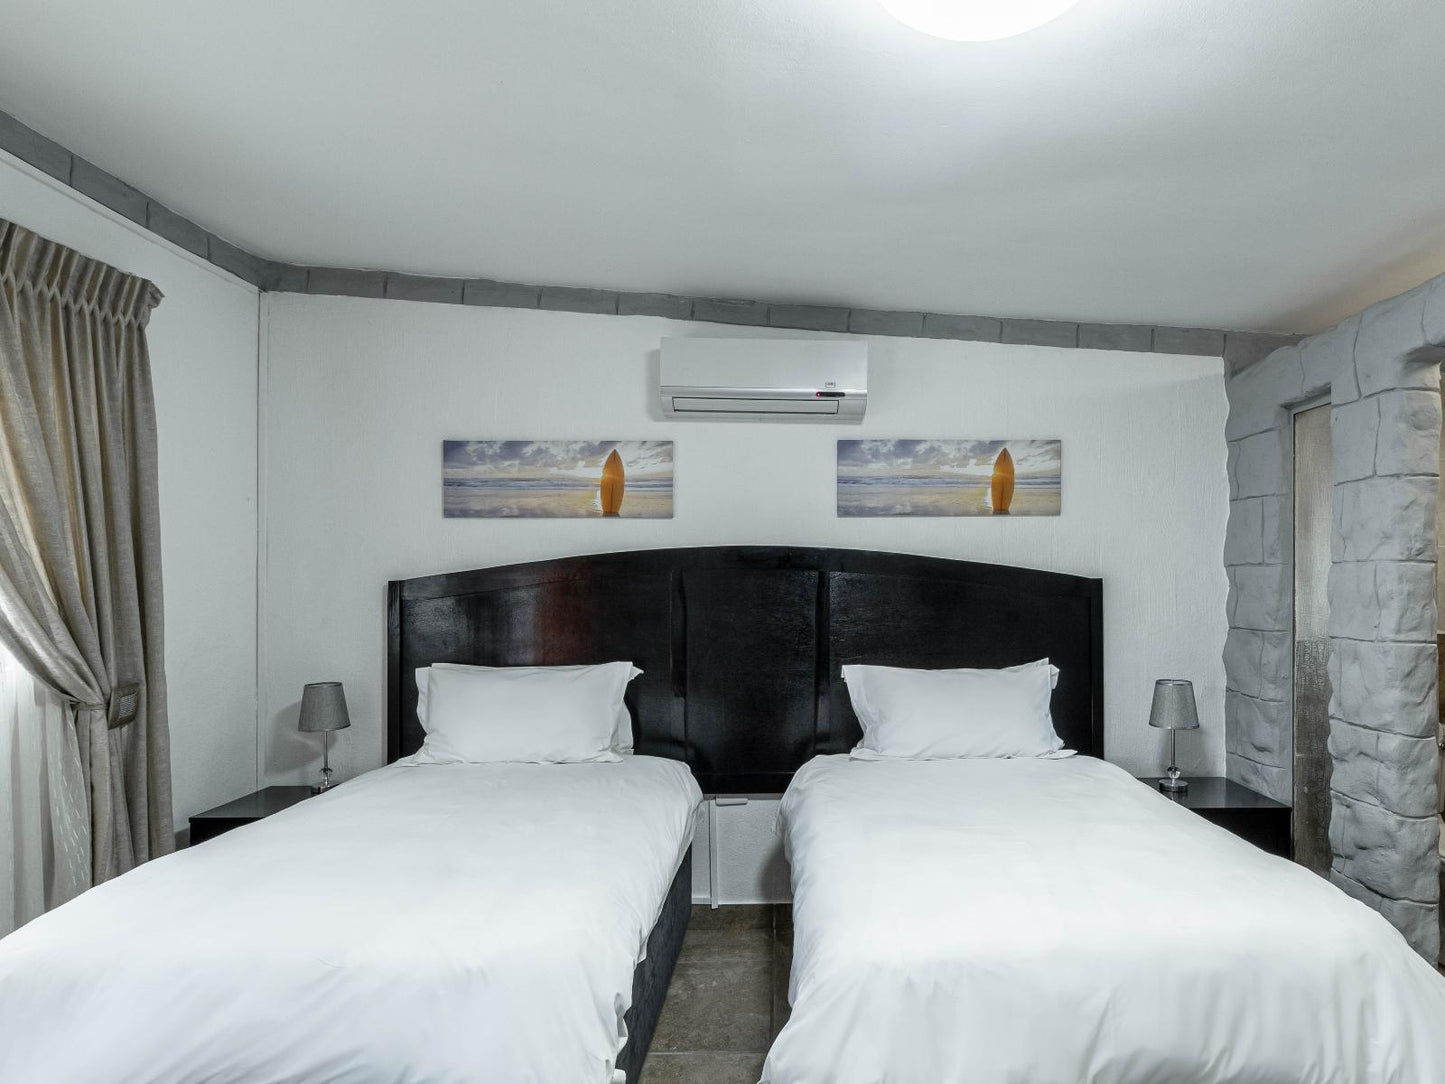 Deluxe Twin Rooms @ Graceland Conference & Lifestyle Centre